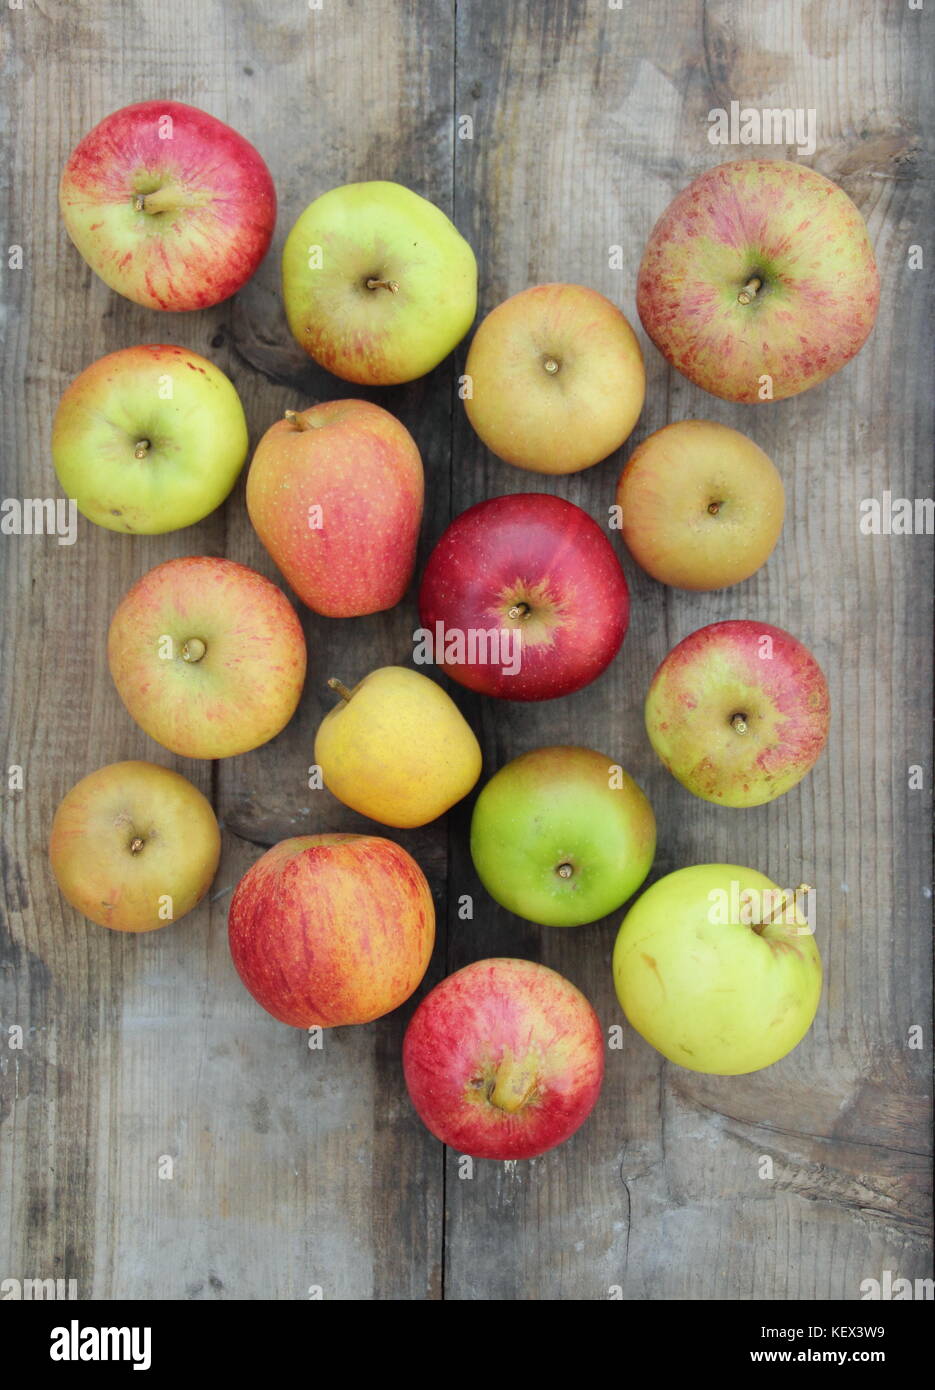 Freshly harvested English apples (malus domestica) including heritage varieties Pitmaston Pineapple, Worcester Pearmain and Lamb's Seedling, autumn UK Stock Photo